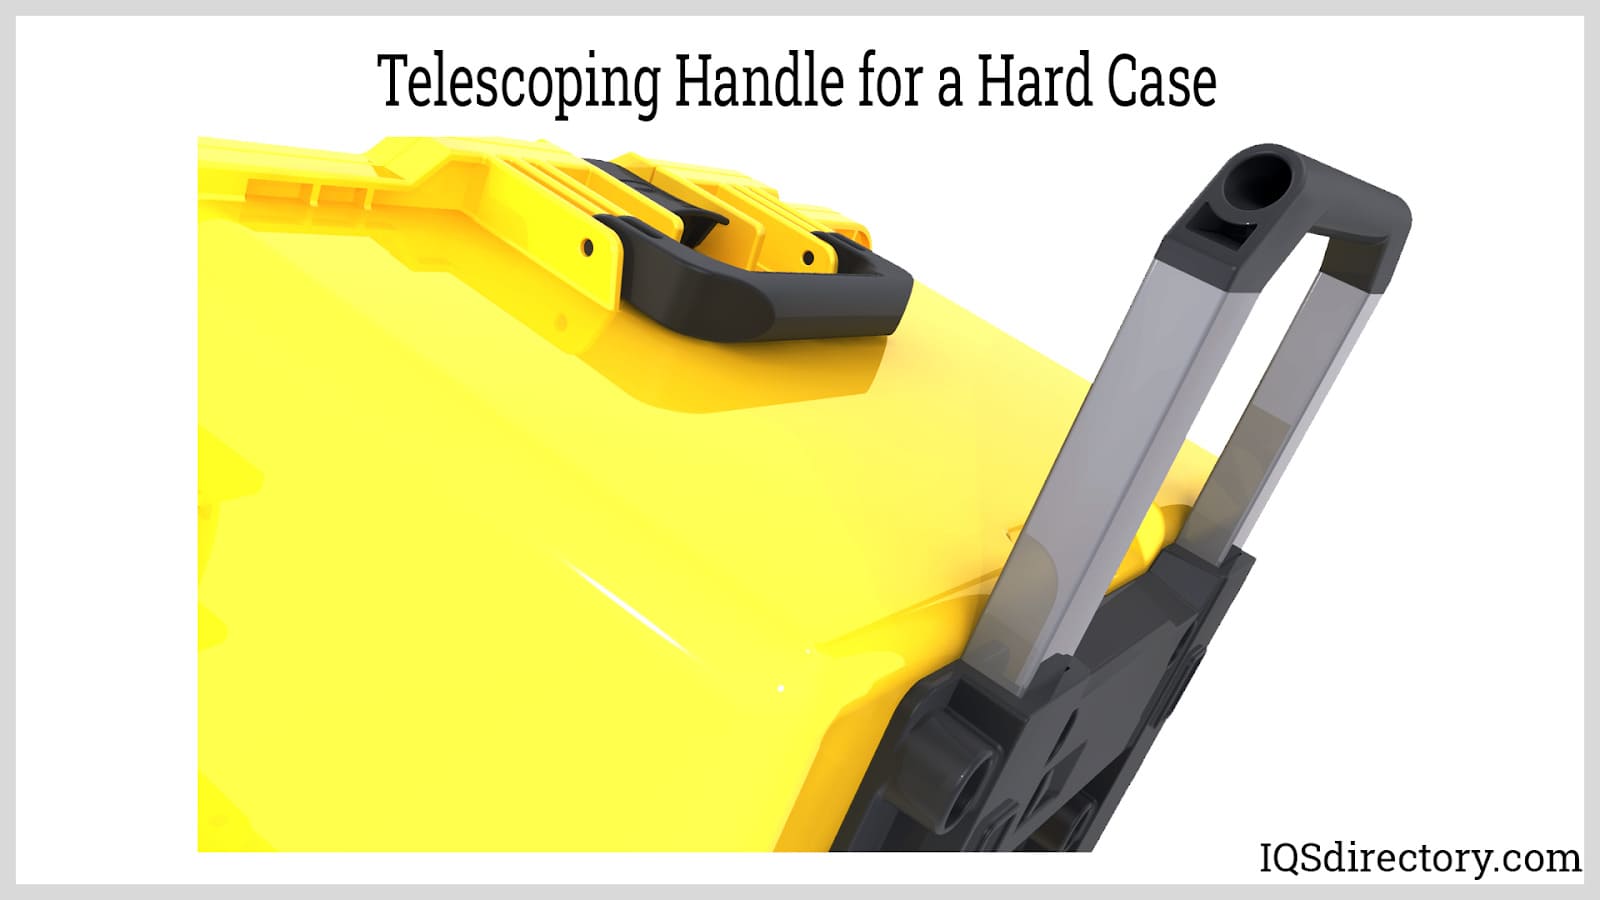 Telescoping Handle for a Hard Case